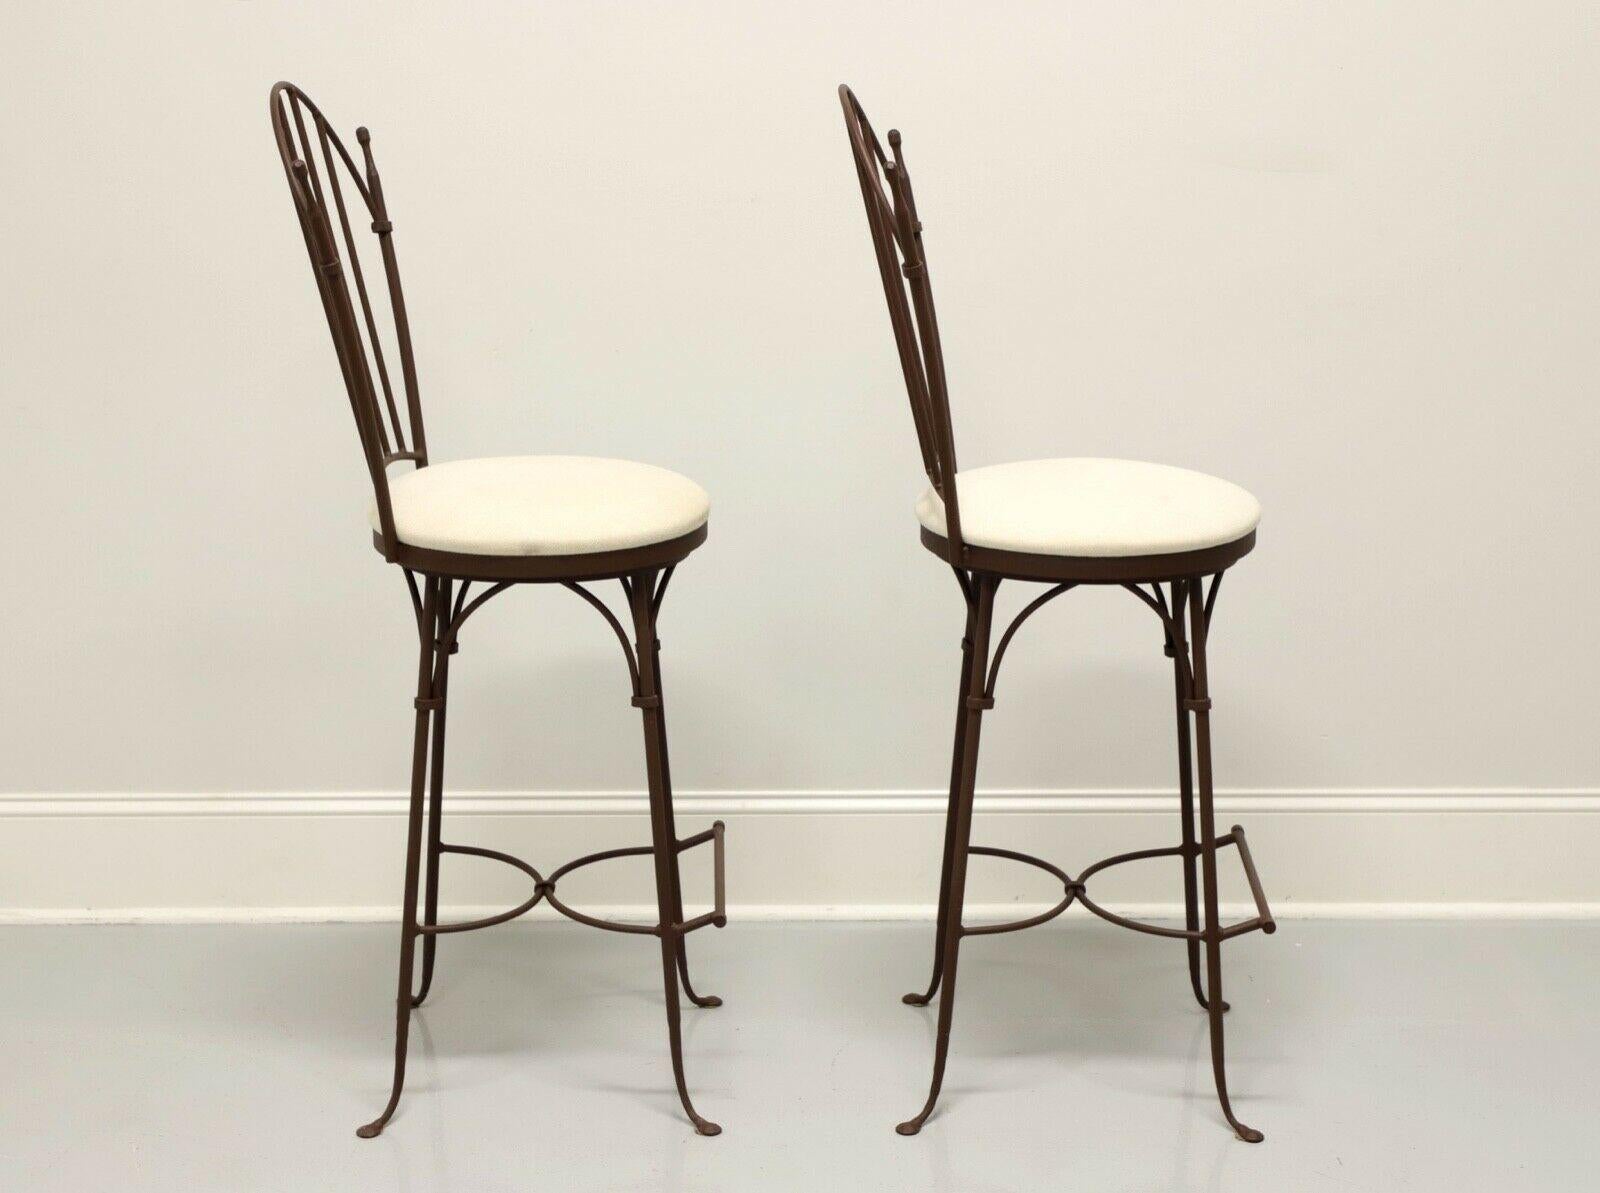 A pair of Contemporary style bar stools by Charleston Forge. Wrought iron with a Shaker arch back, cream colored fabric upholstered round seats that swivel, arced stretchers and bar foot rest. Made in Boone, North Carolina, USA, in the early 21st